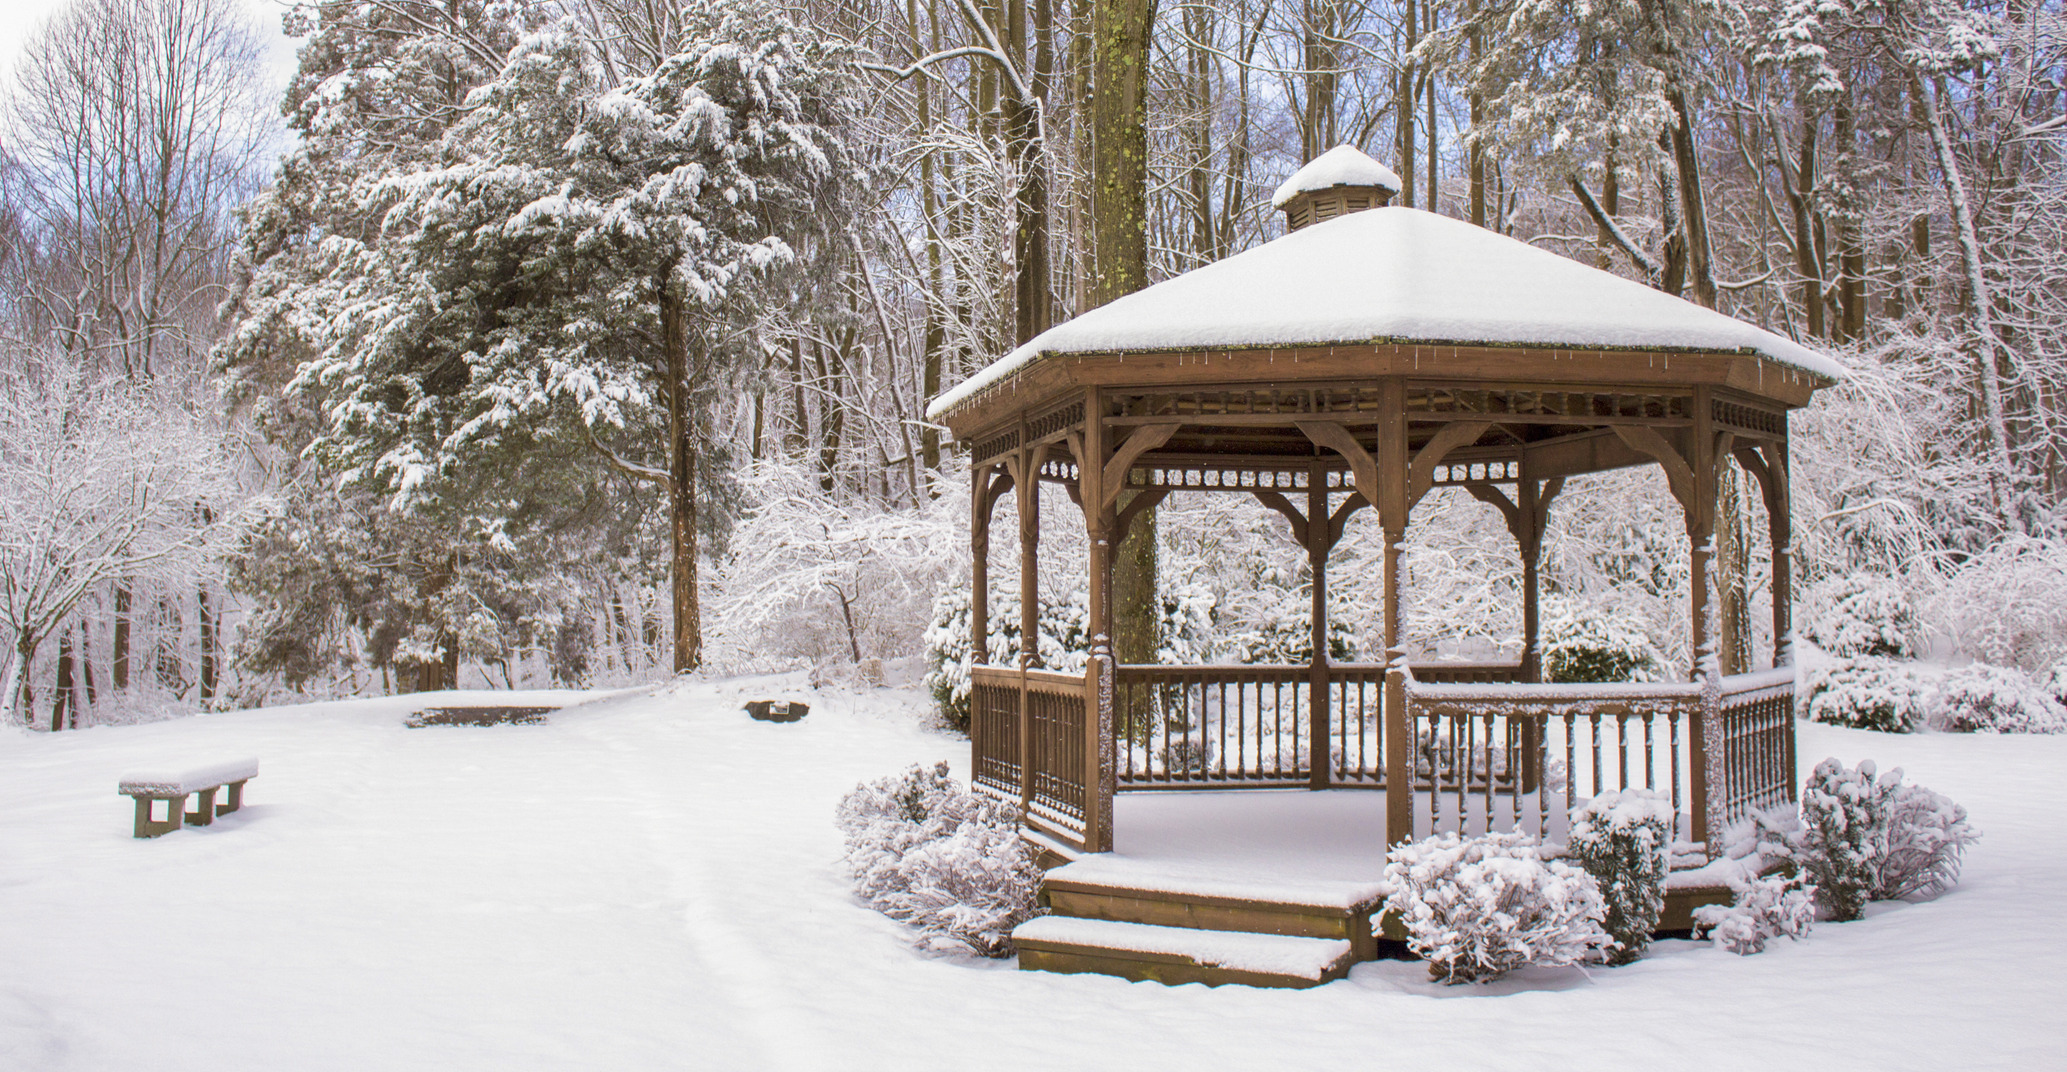 Wooden gazeebo covered in snow